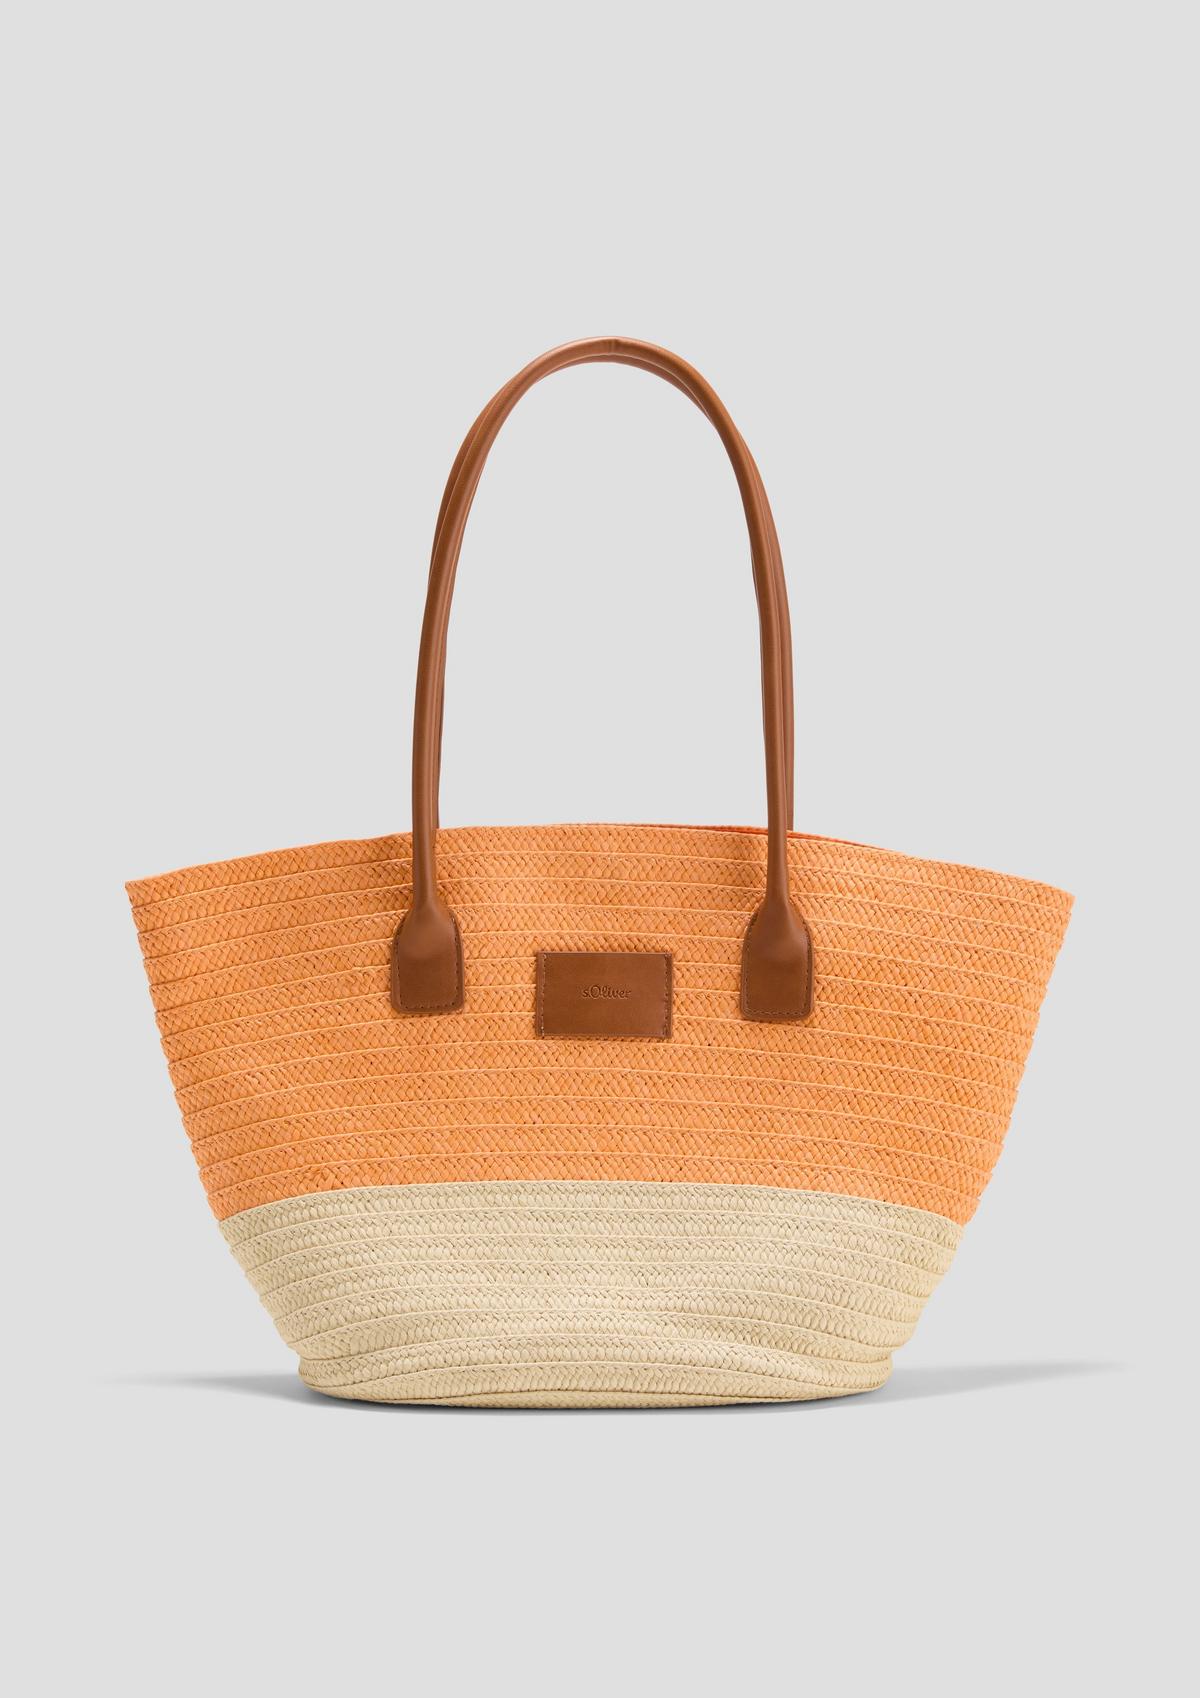 Bast-look shopper with a magnetic closure